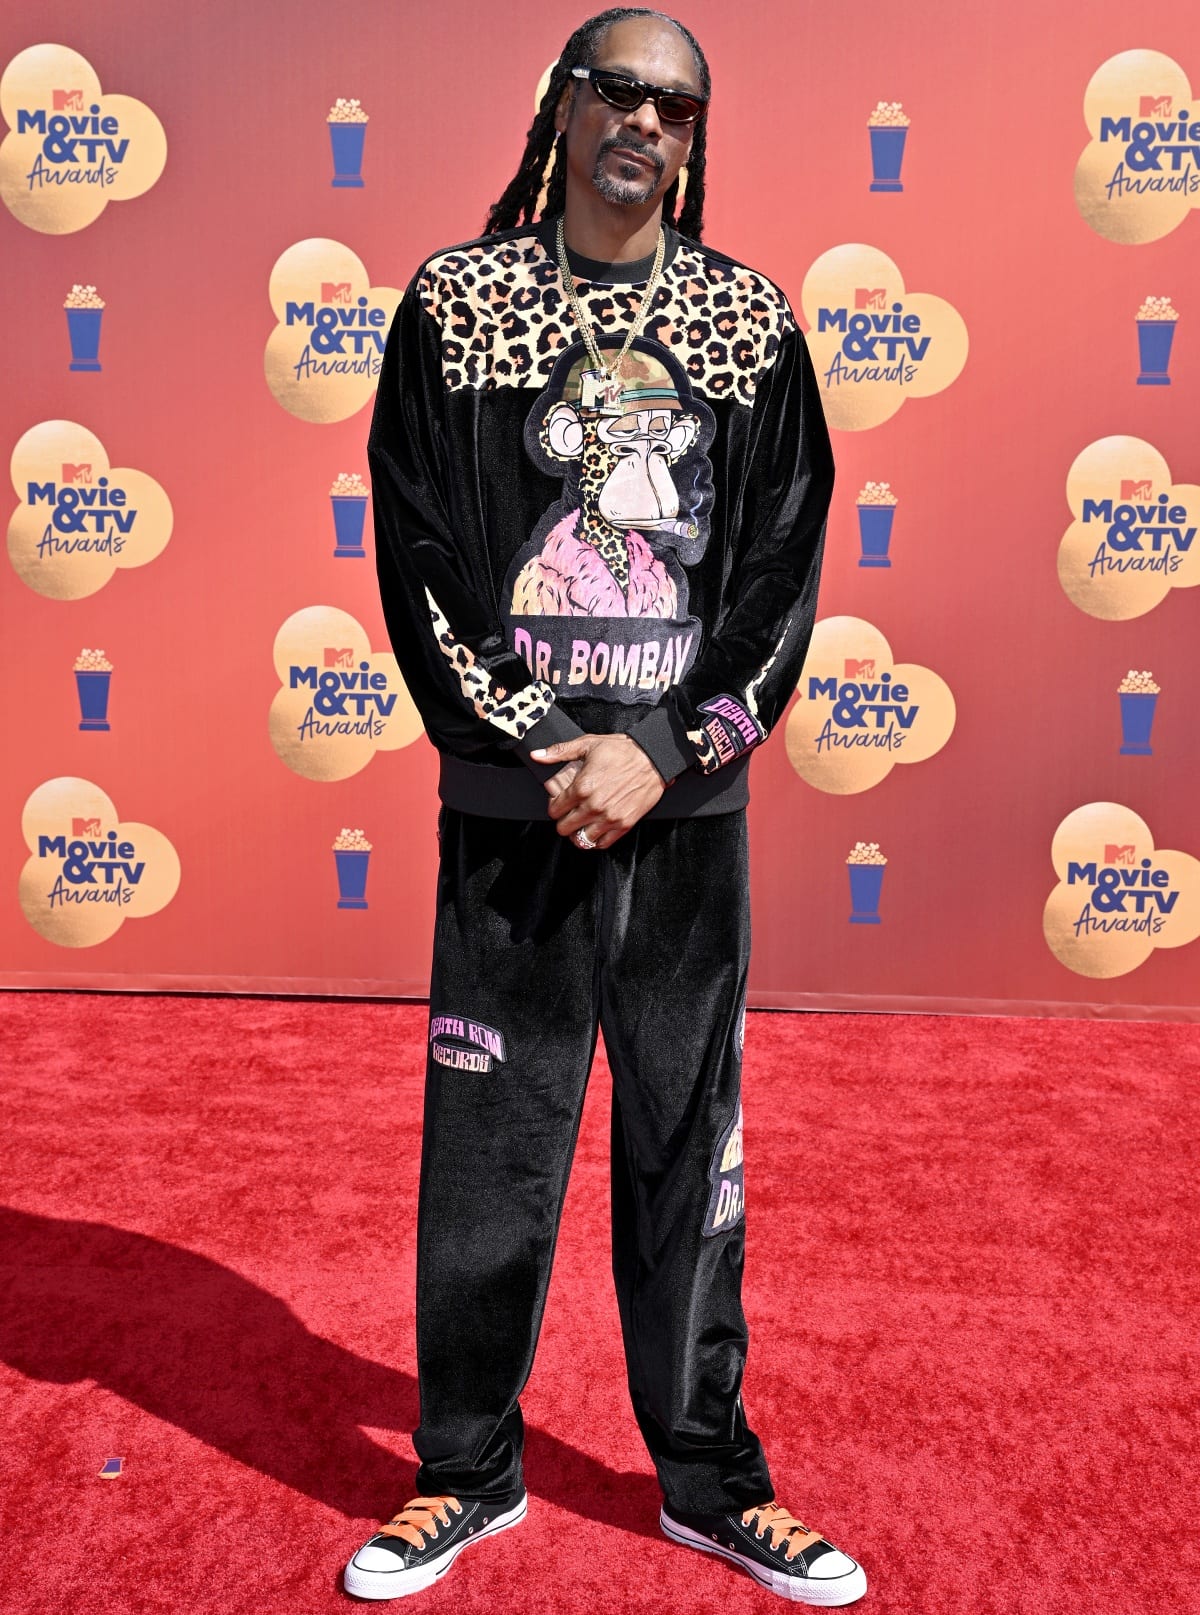 Snoop Dogg towering over everyone at the 2022 MTV Movie & TV Awards